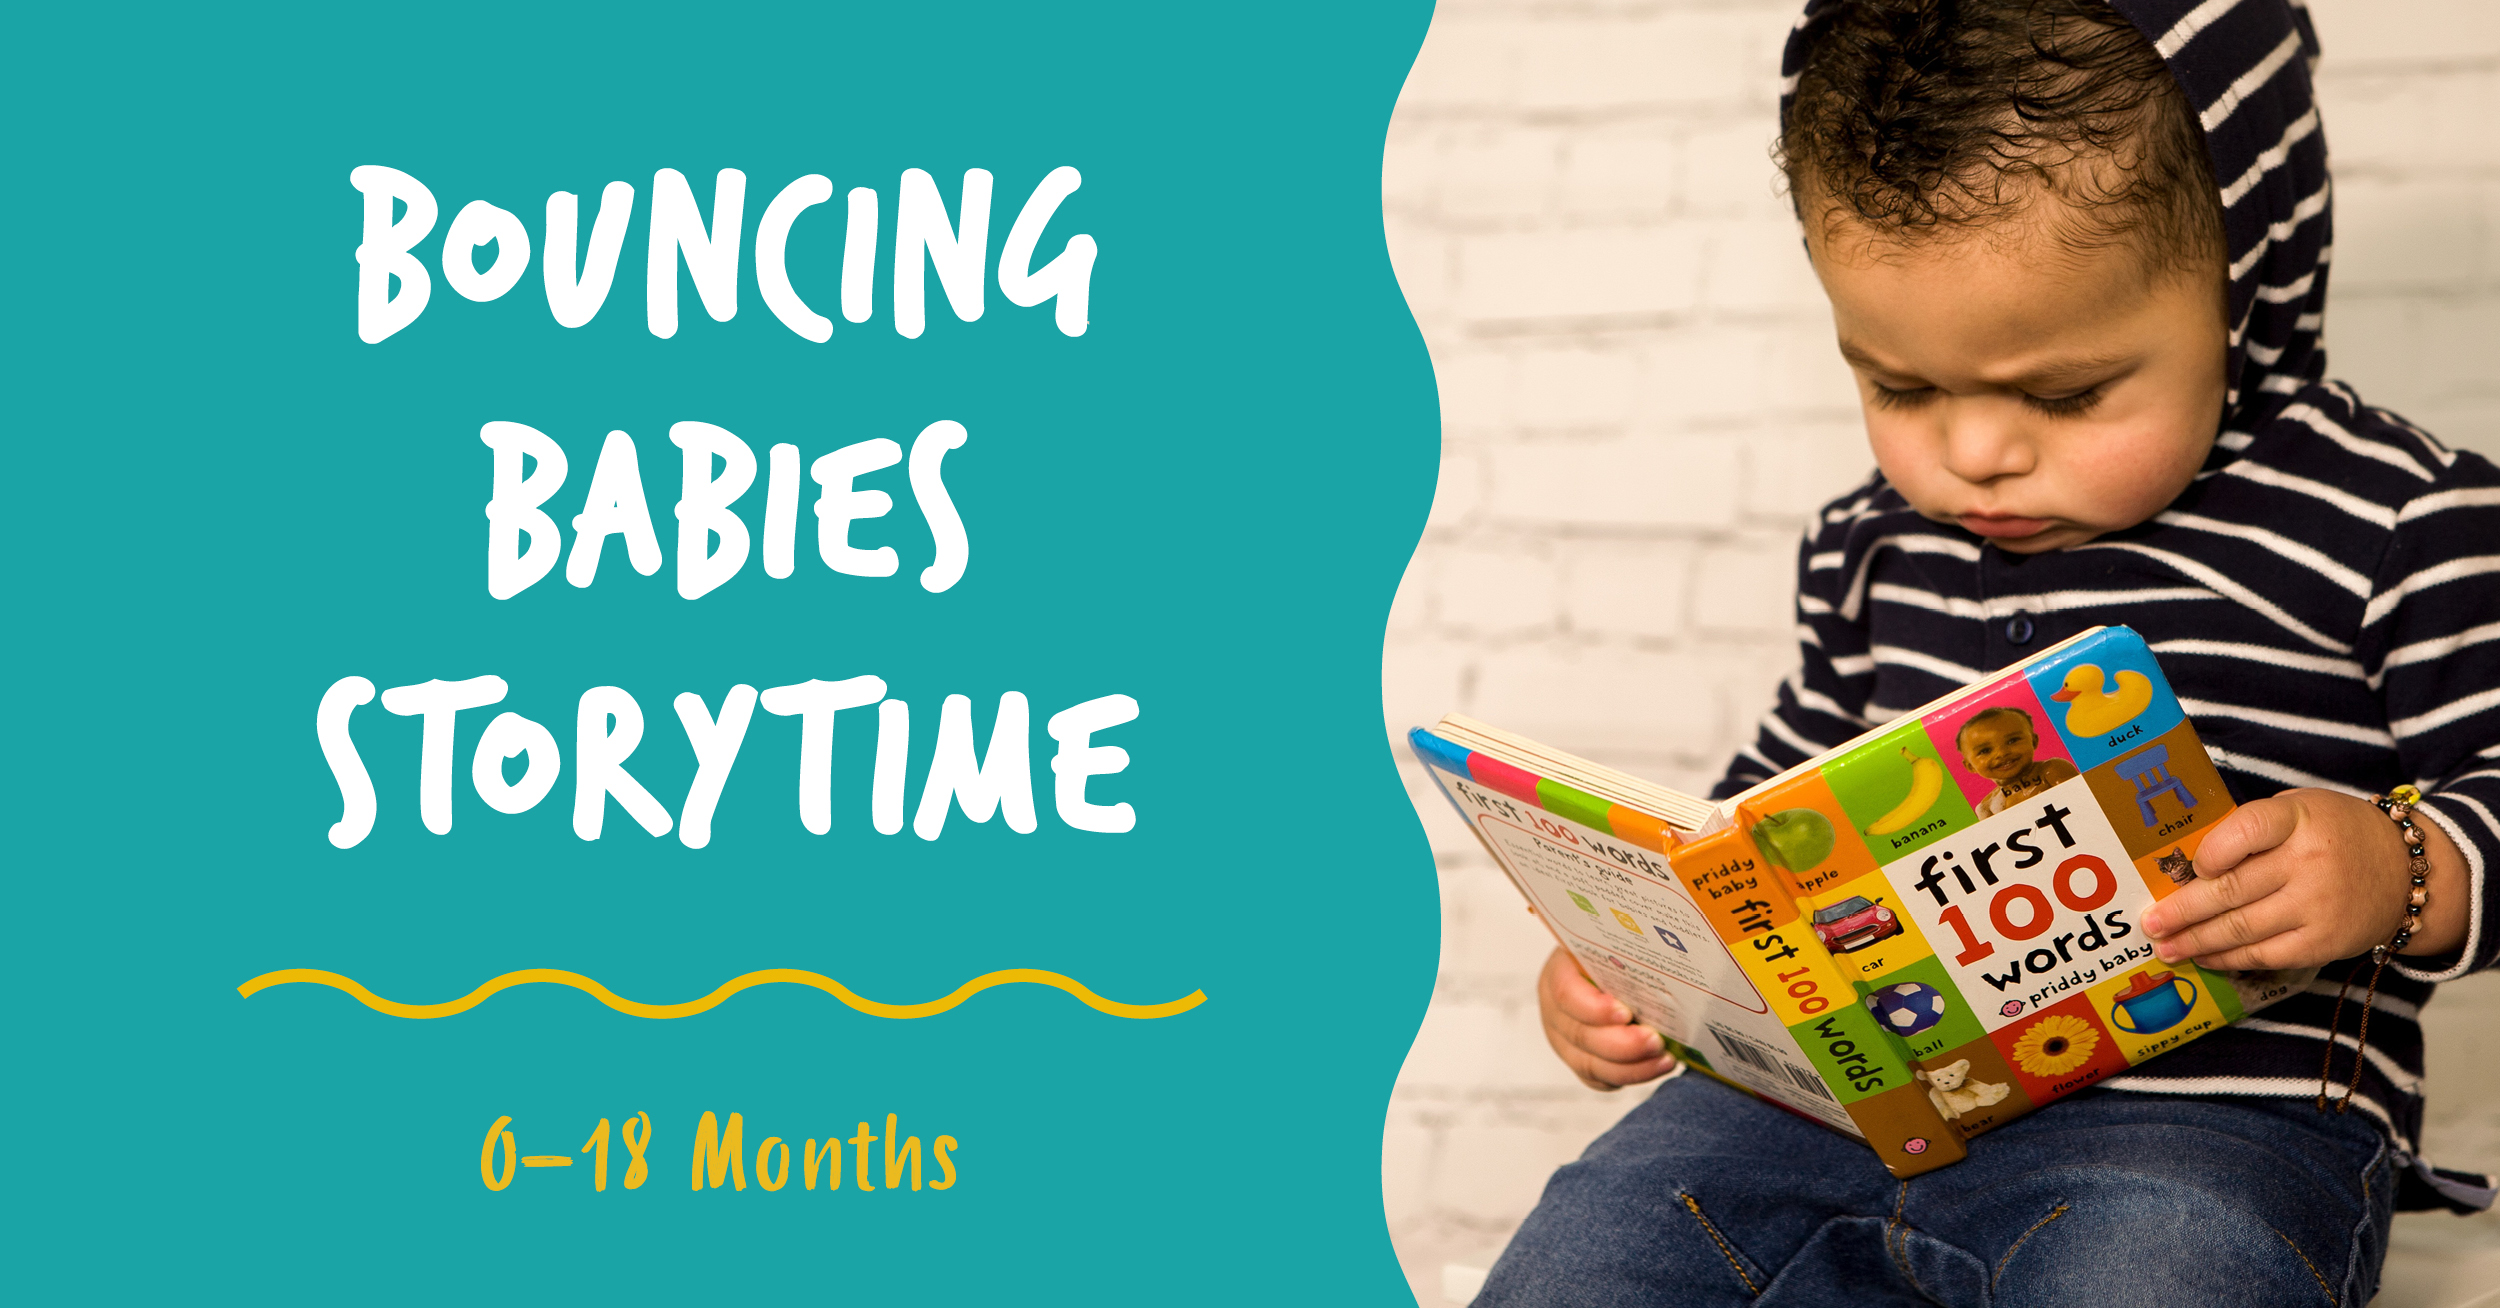 Bouncing Babies Storytime 0 -18 months. Image of a child reading the book "First 100 words"